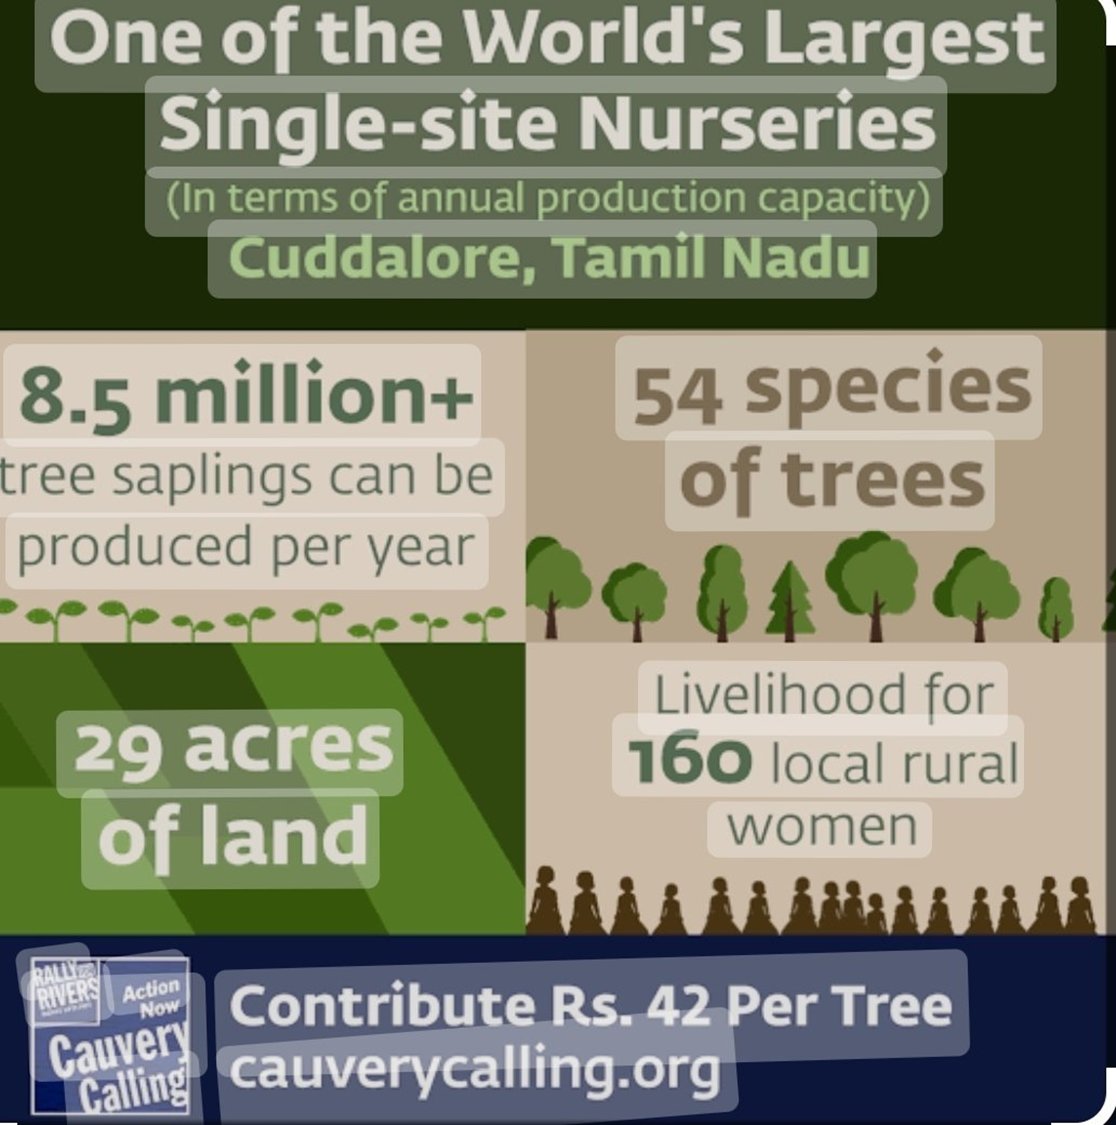 Wastelands are underutilized area and produce less than 20% of its biological productivity. Forests  absorbs a net 7.6 bMT of CO2/Year Agroforestry/Tree based agro can reverse the situation. 
#SaveSoilFixClimateChange #SoilForClimateAction #ConsciousPlanet savesoil.org